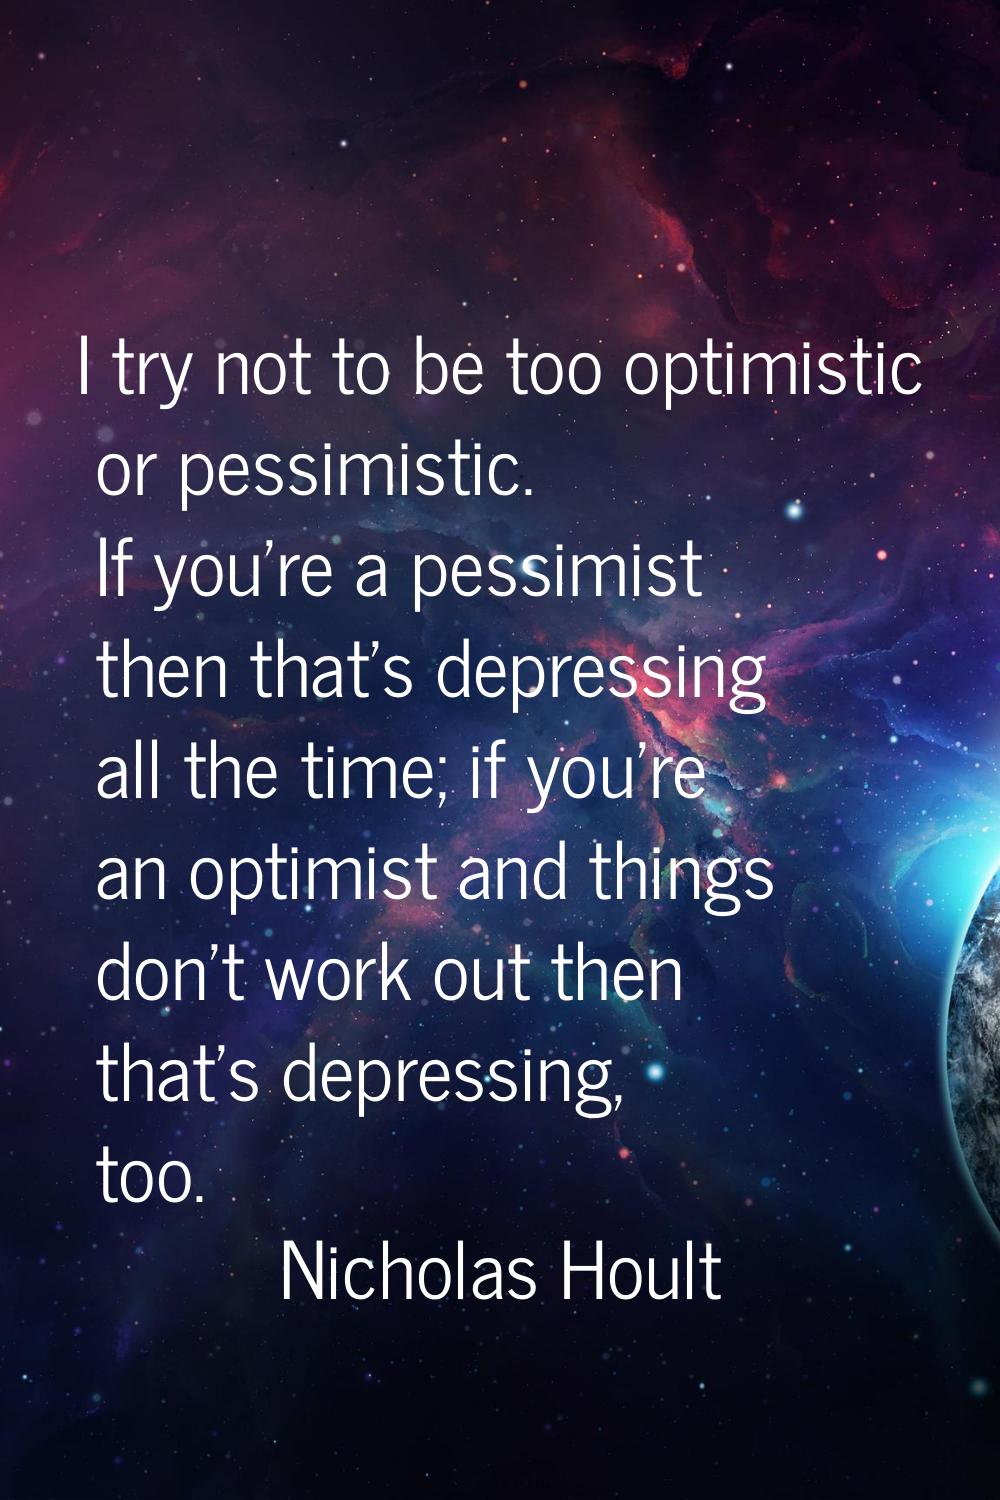 I try not to be too optimistic or pessimistic. If you're a pessimist then that's depressing all the